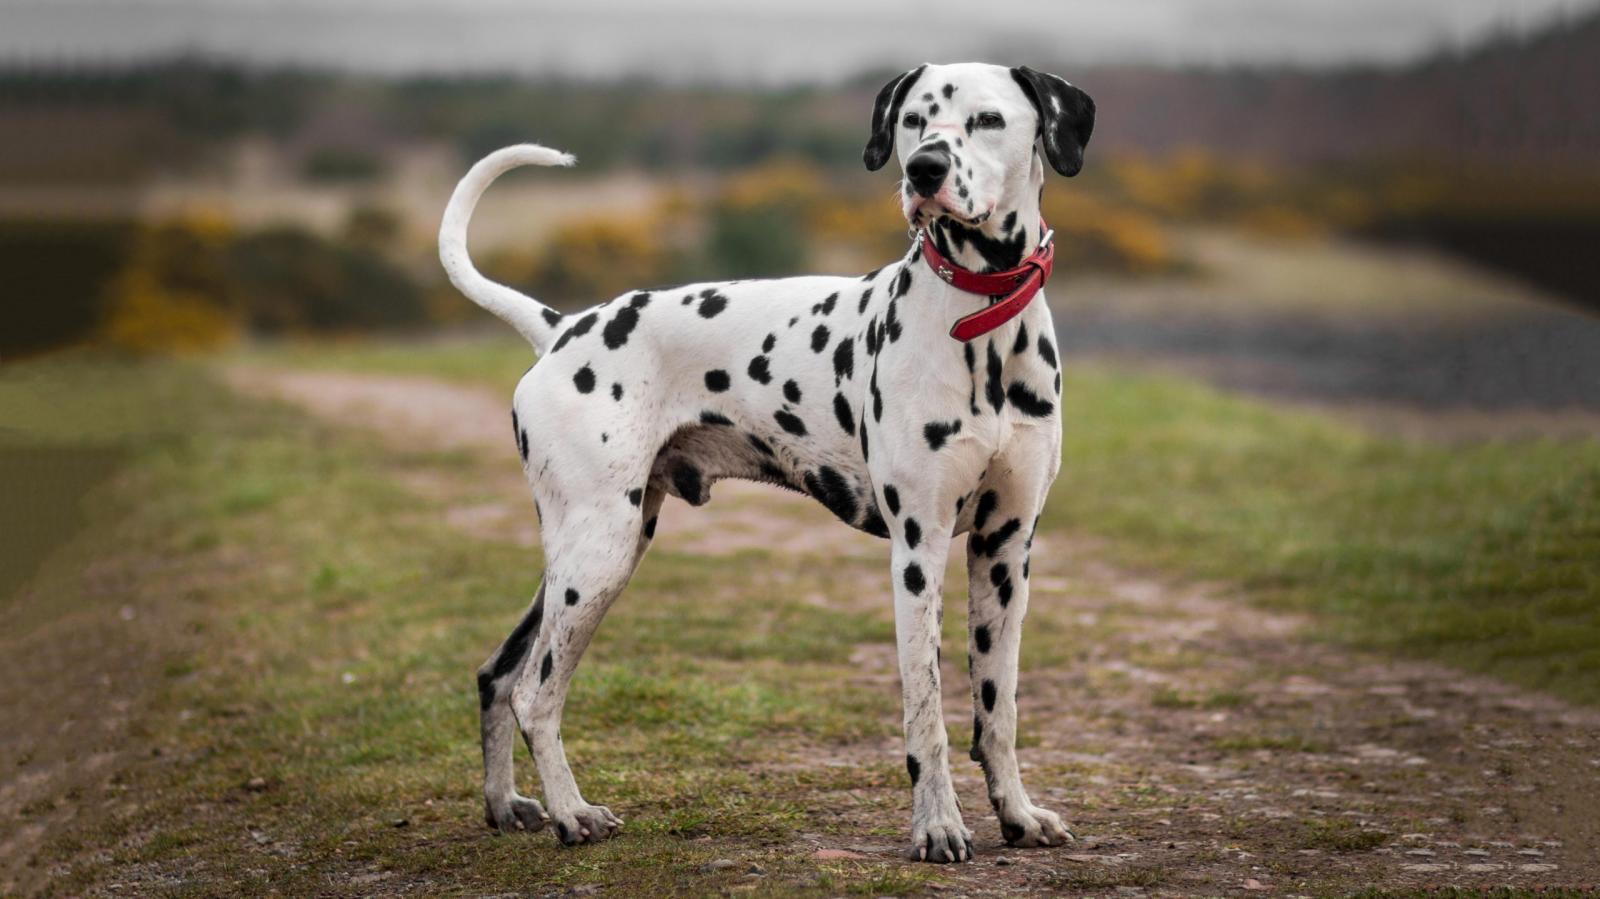 Let’s See If You Know Enough to Get 20/25 on This Mixed Knowledge Quiz Dalmatian